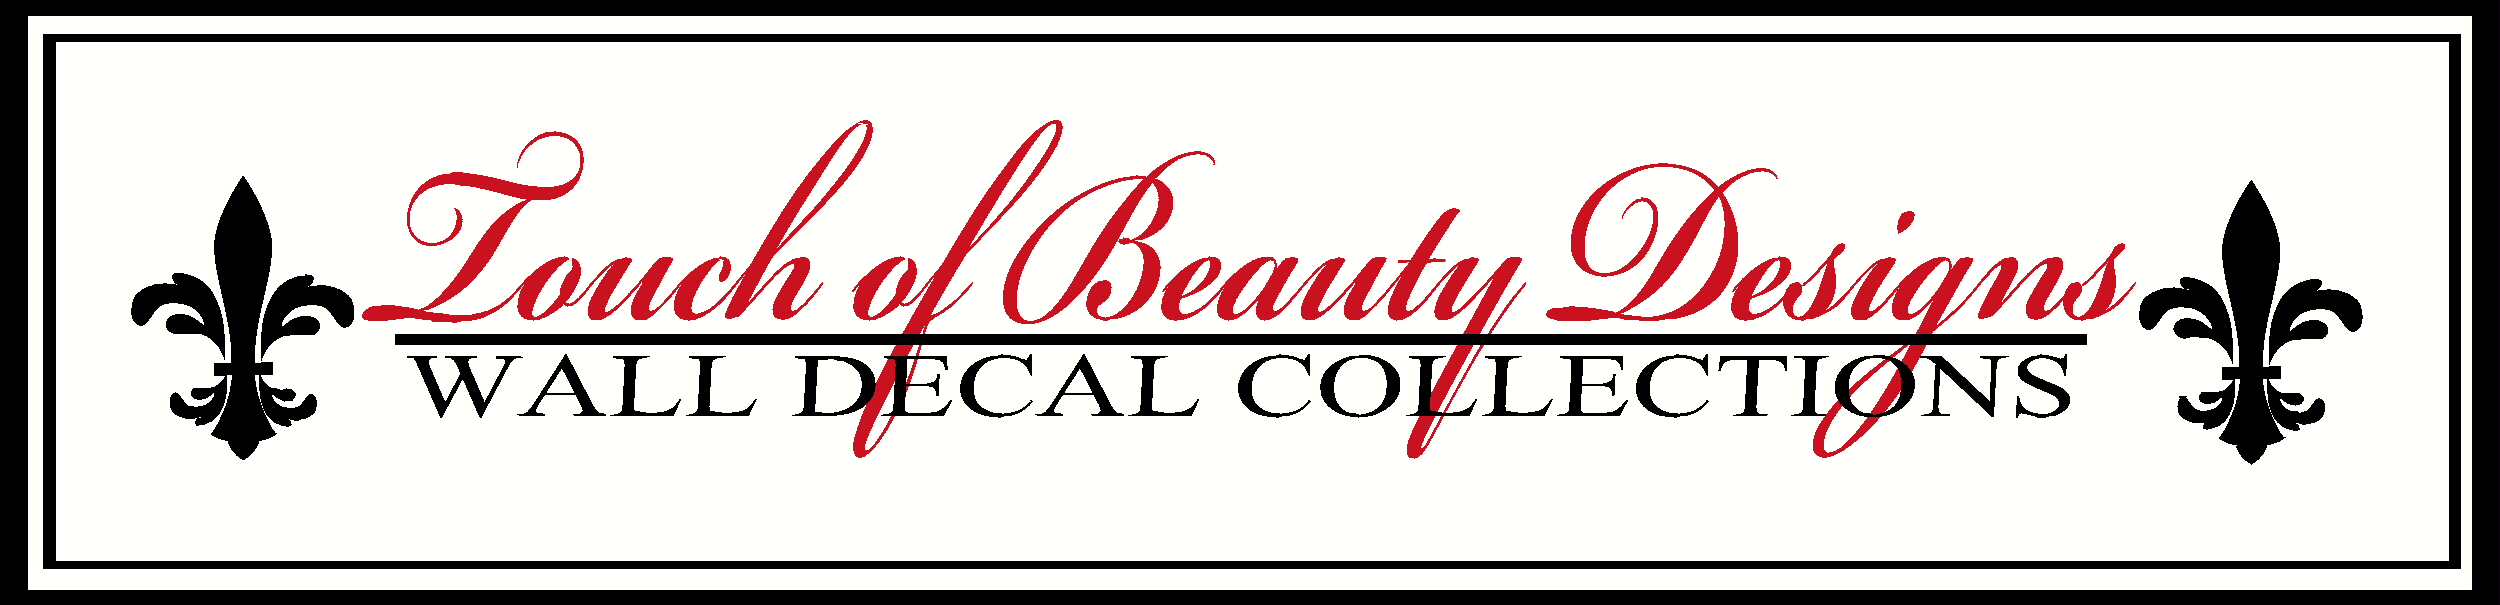 Touch of Beauty Designs Custom Wall Decals